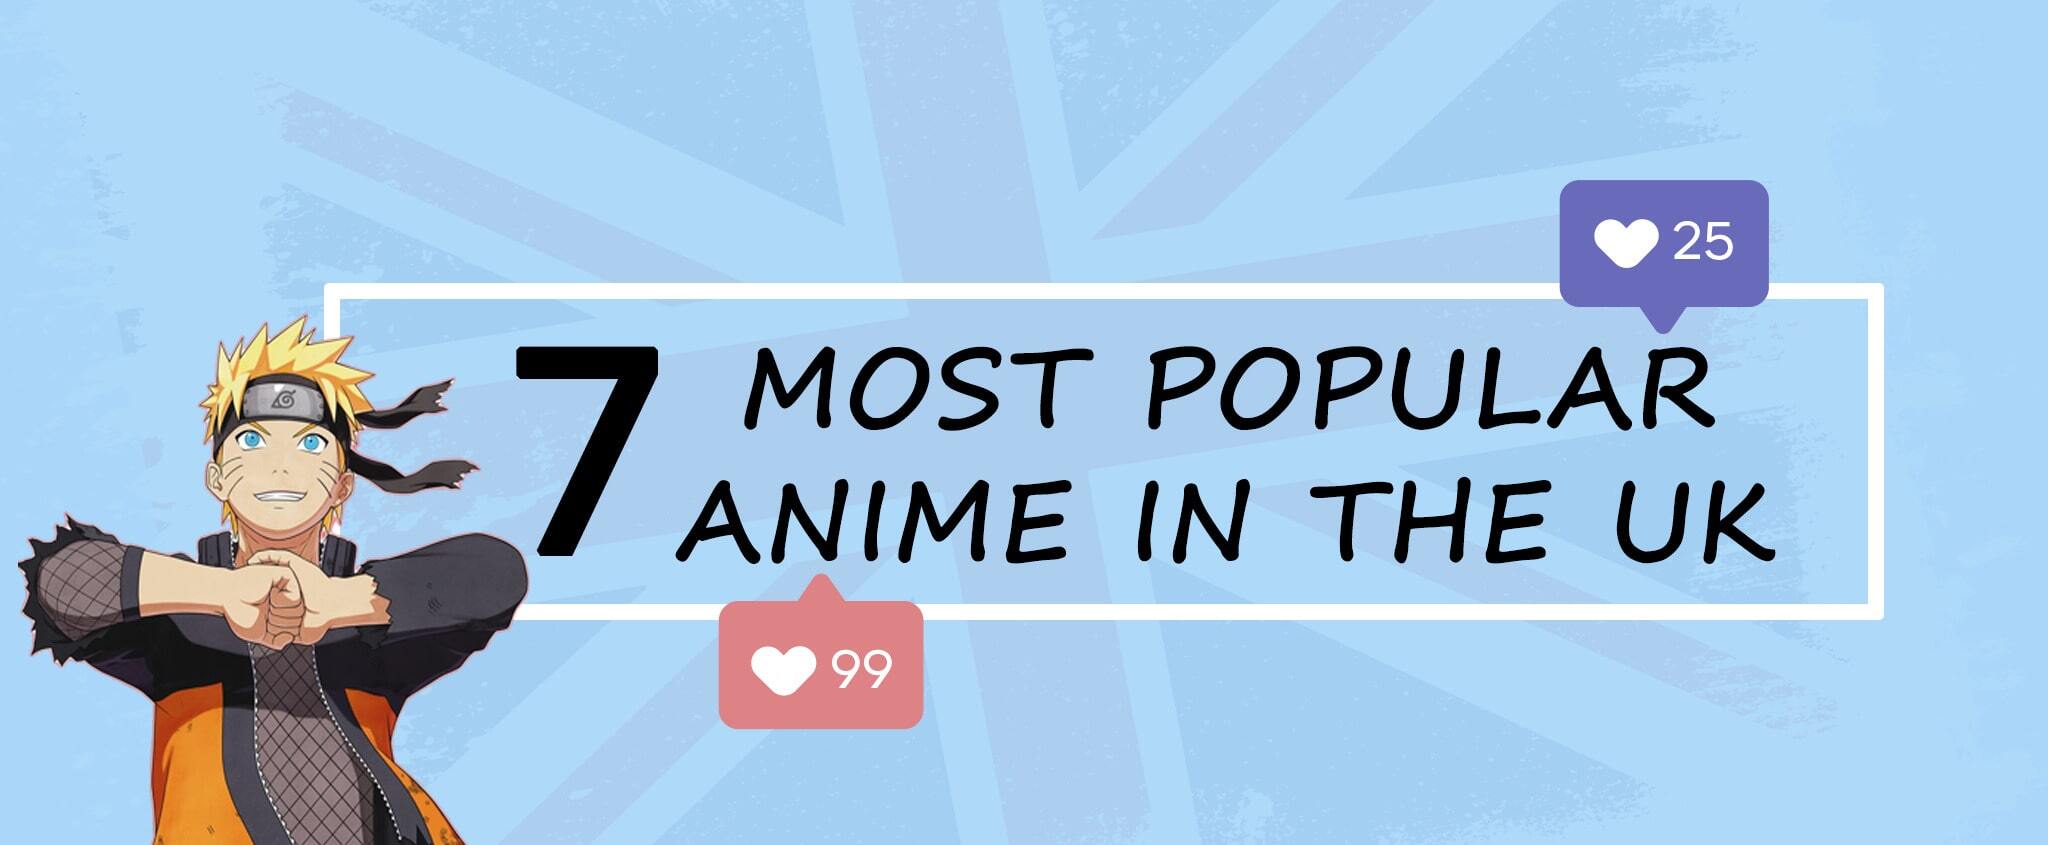 Top 7 Popular Anime Series on Netflix That You Should Watch